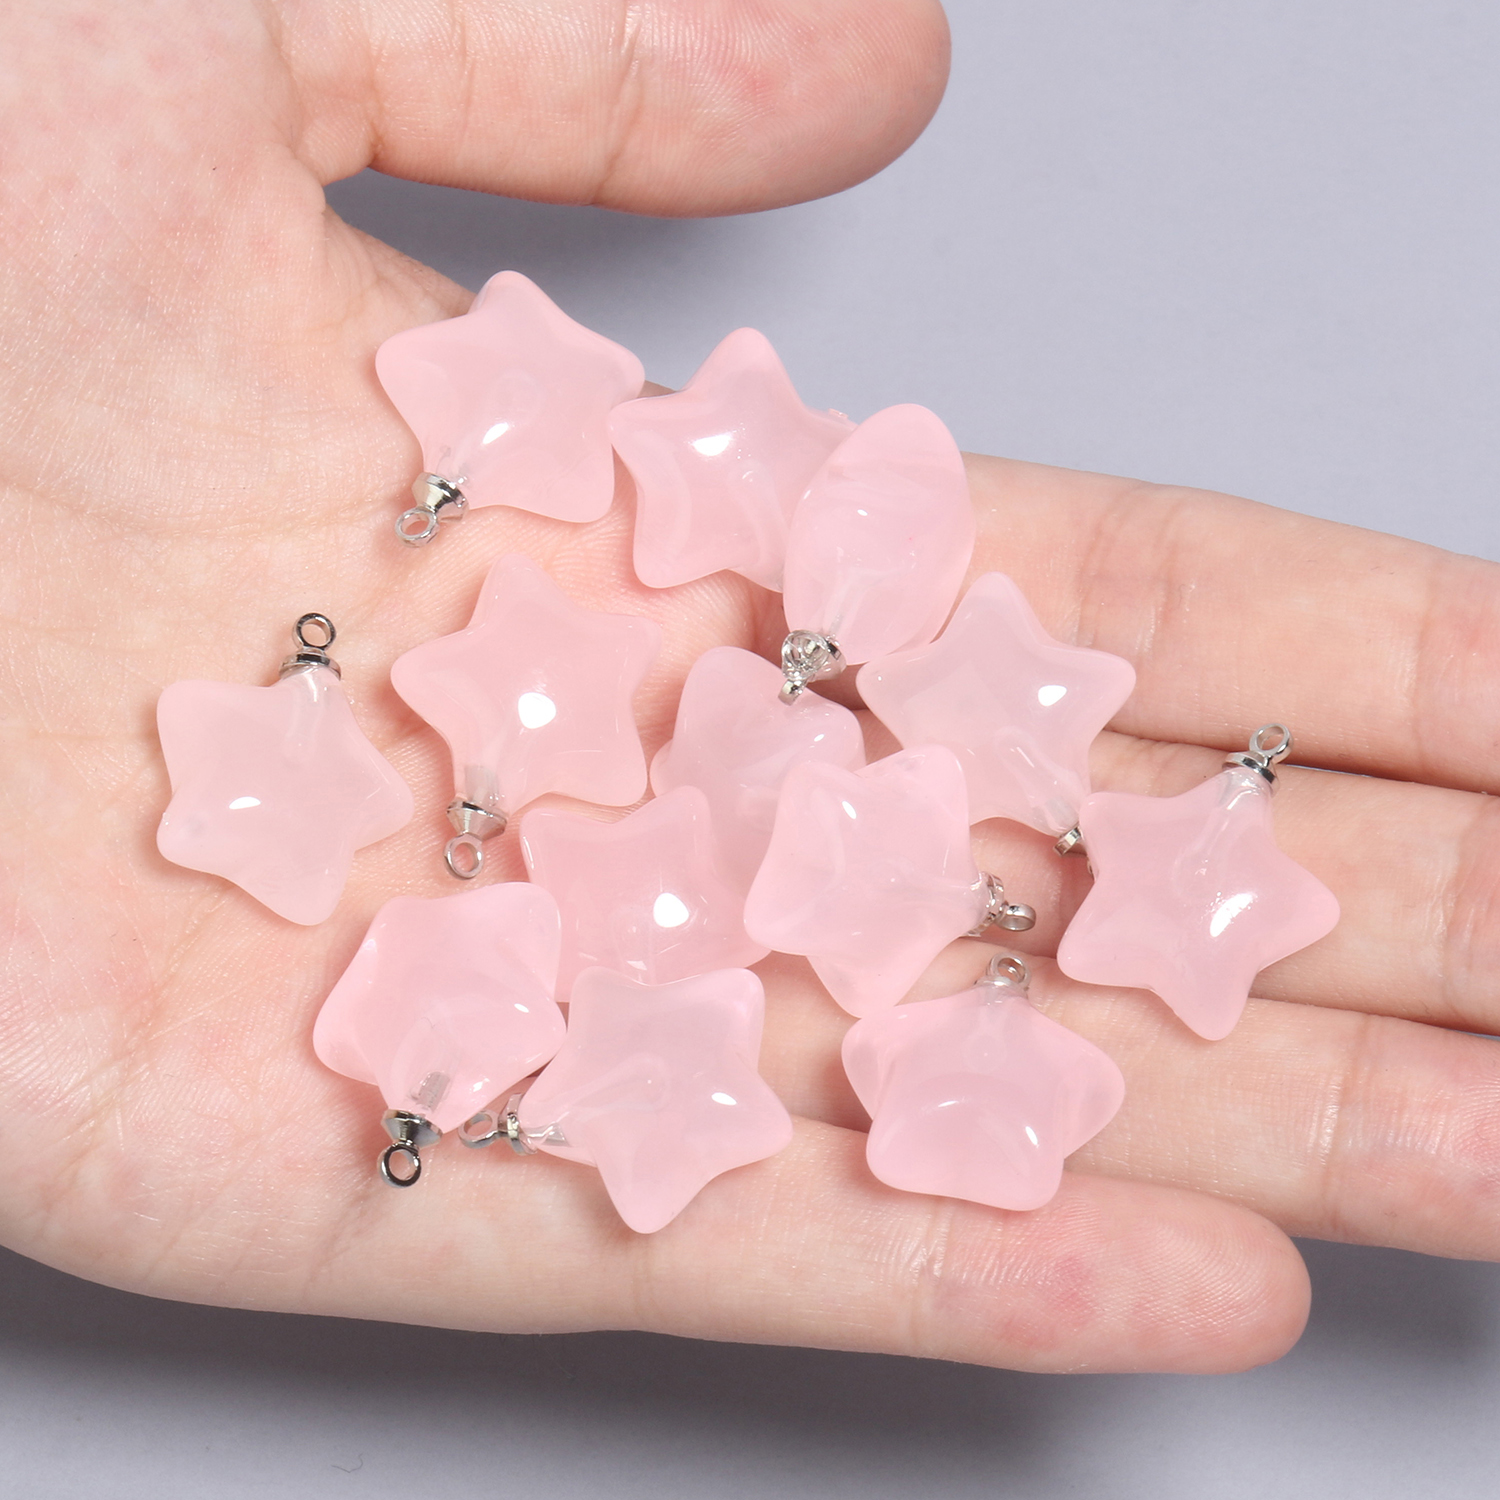 Red Enamel Star Charms For Jewelry Making, 8mm - 15 pack – Easy Crafts